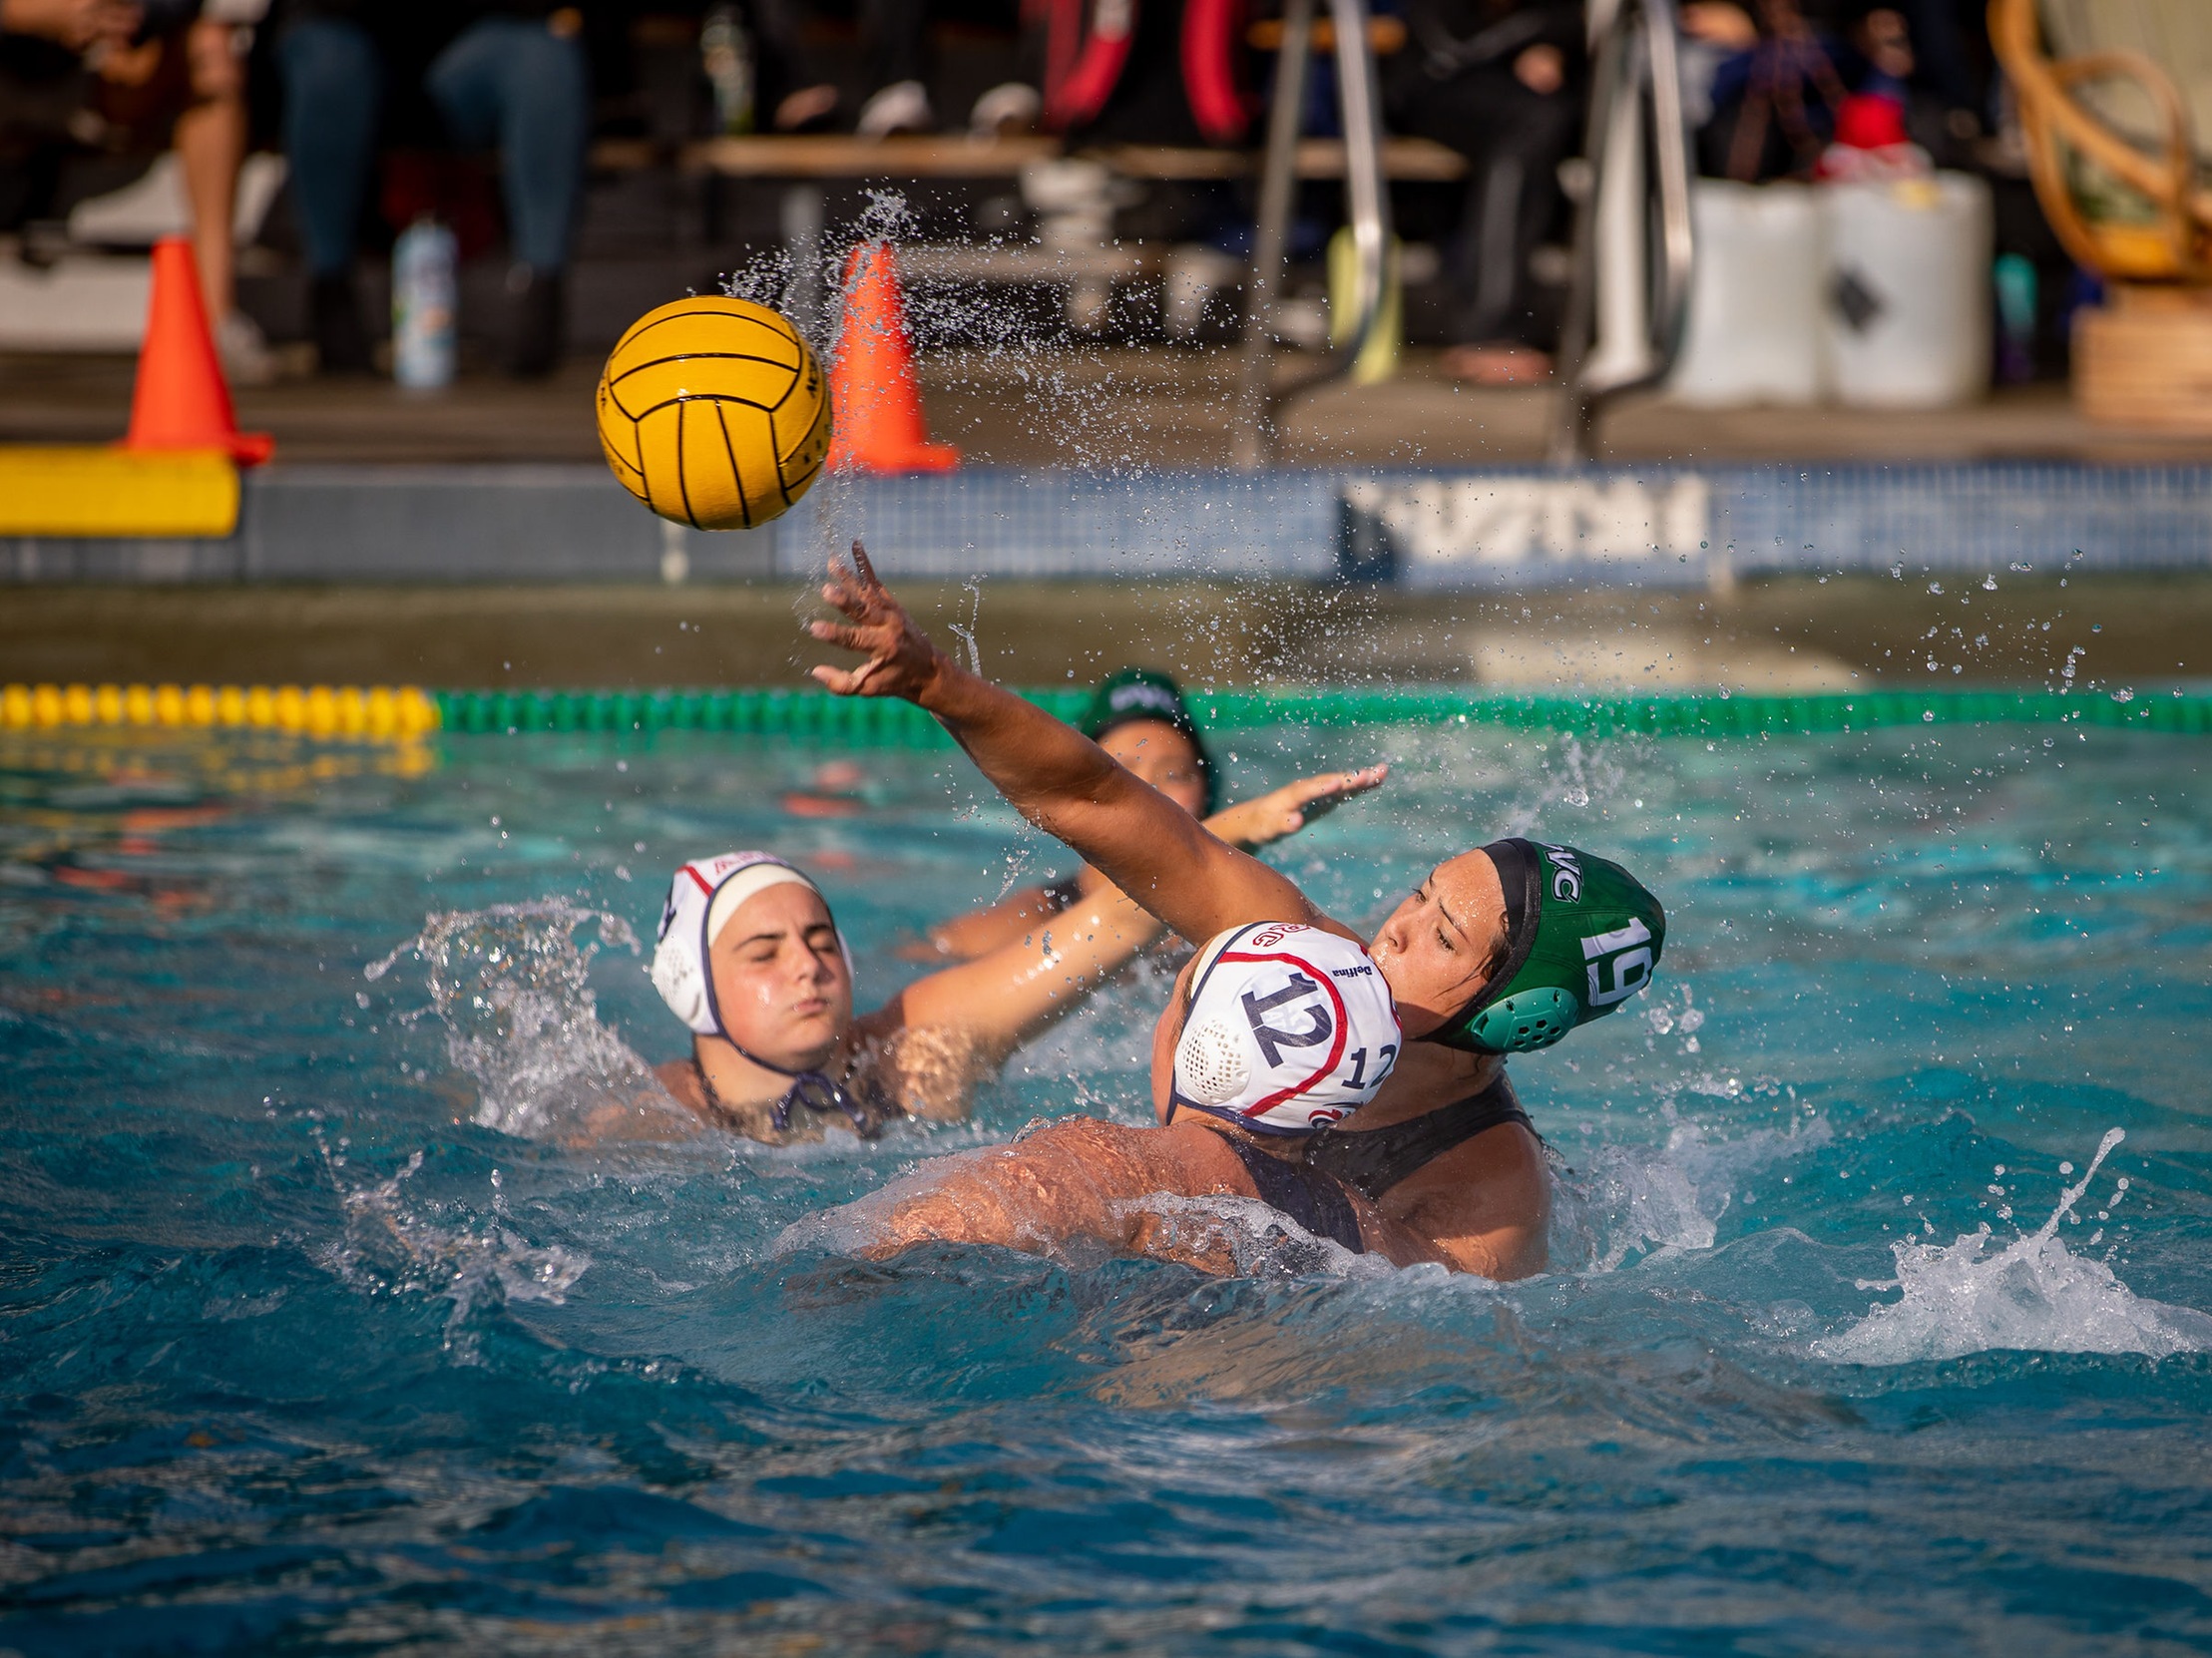 Women's Water Polo defeat MJC to win the 5th place game in the Big 8 Tourney